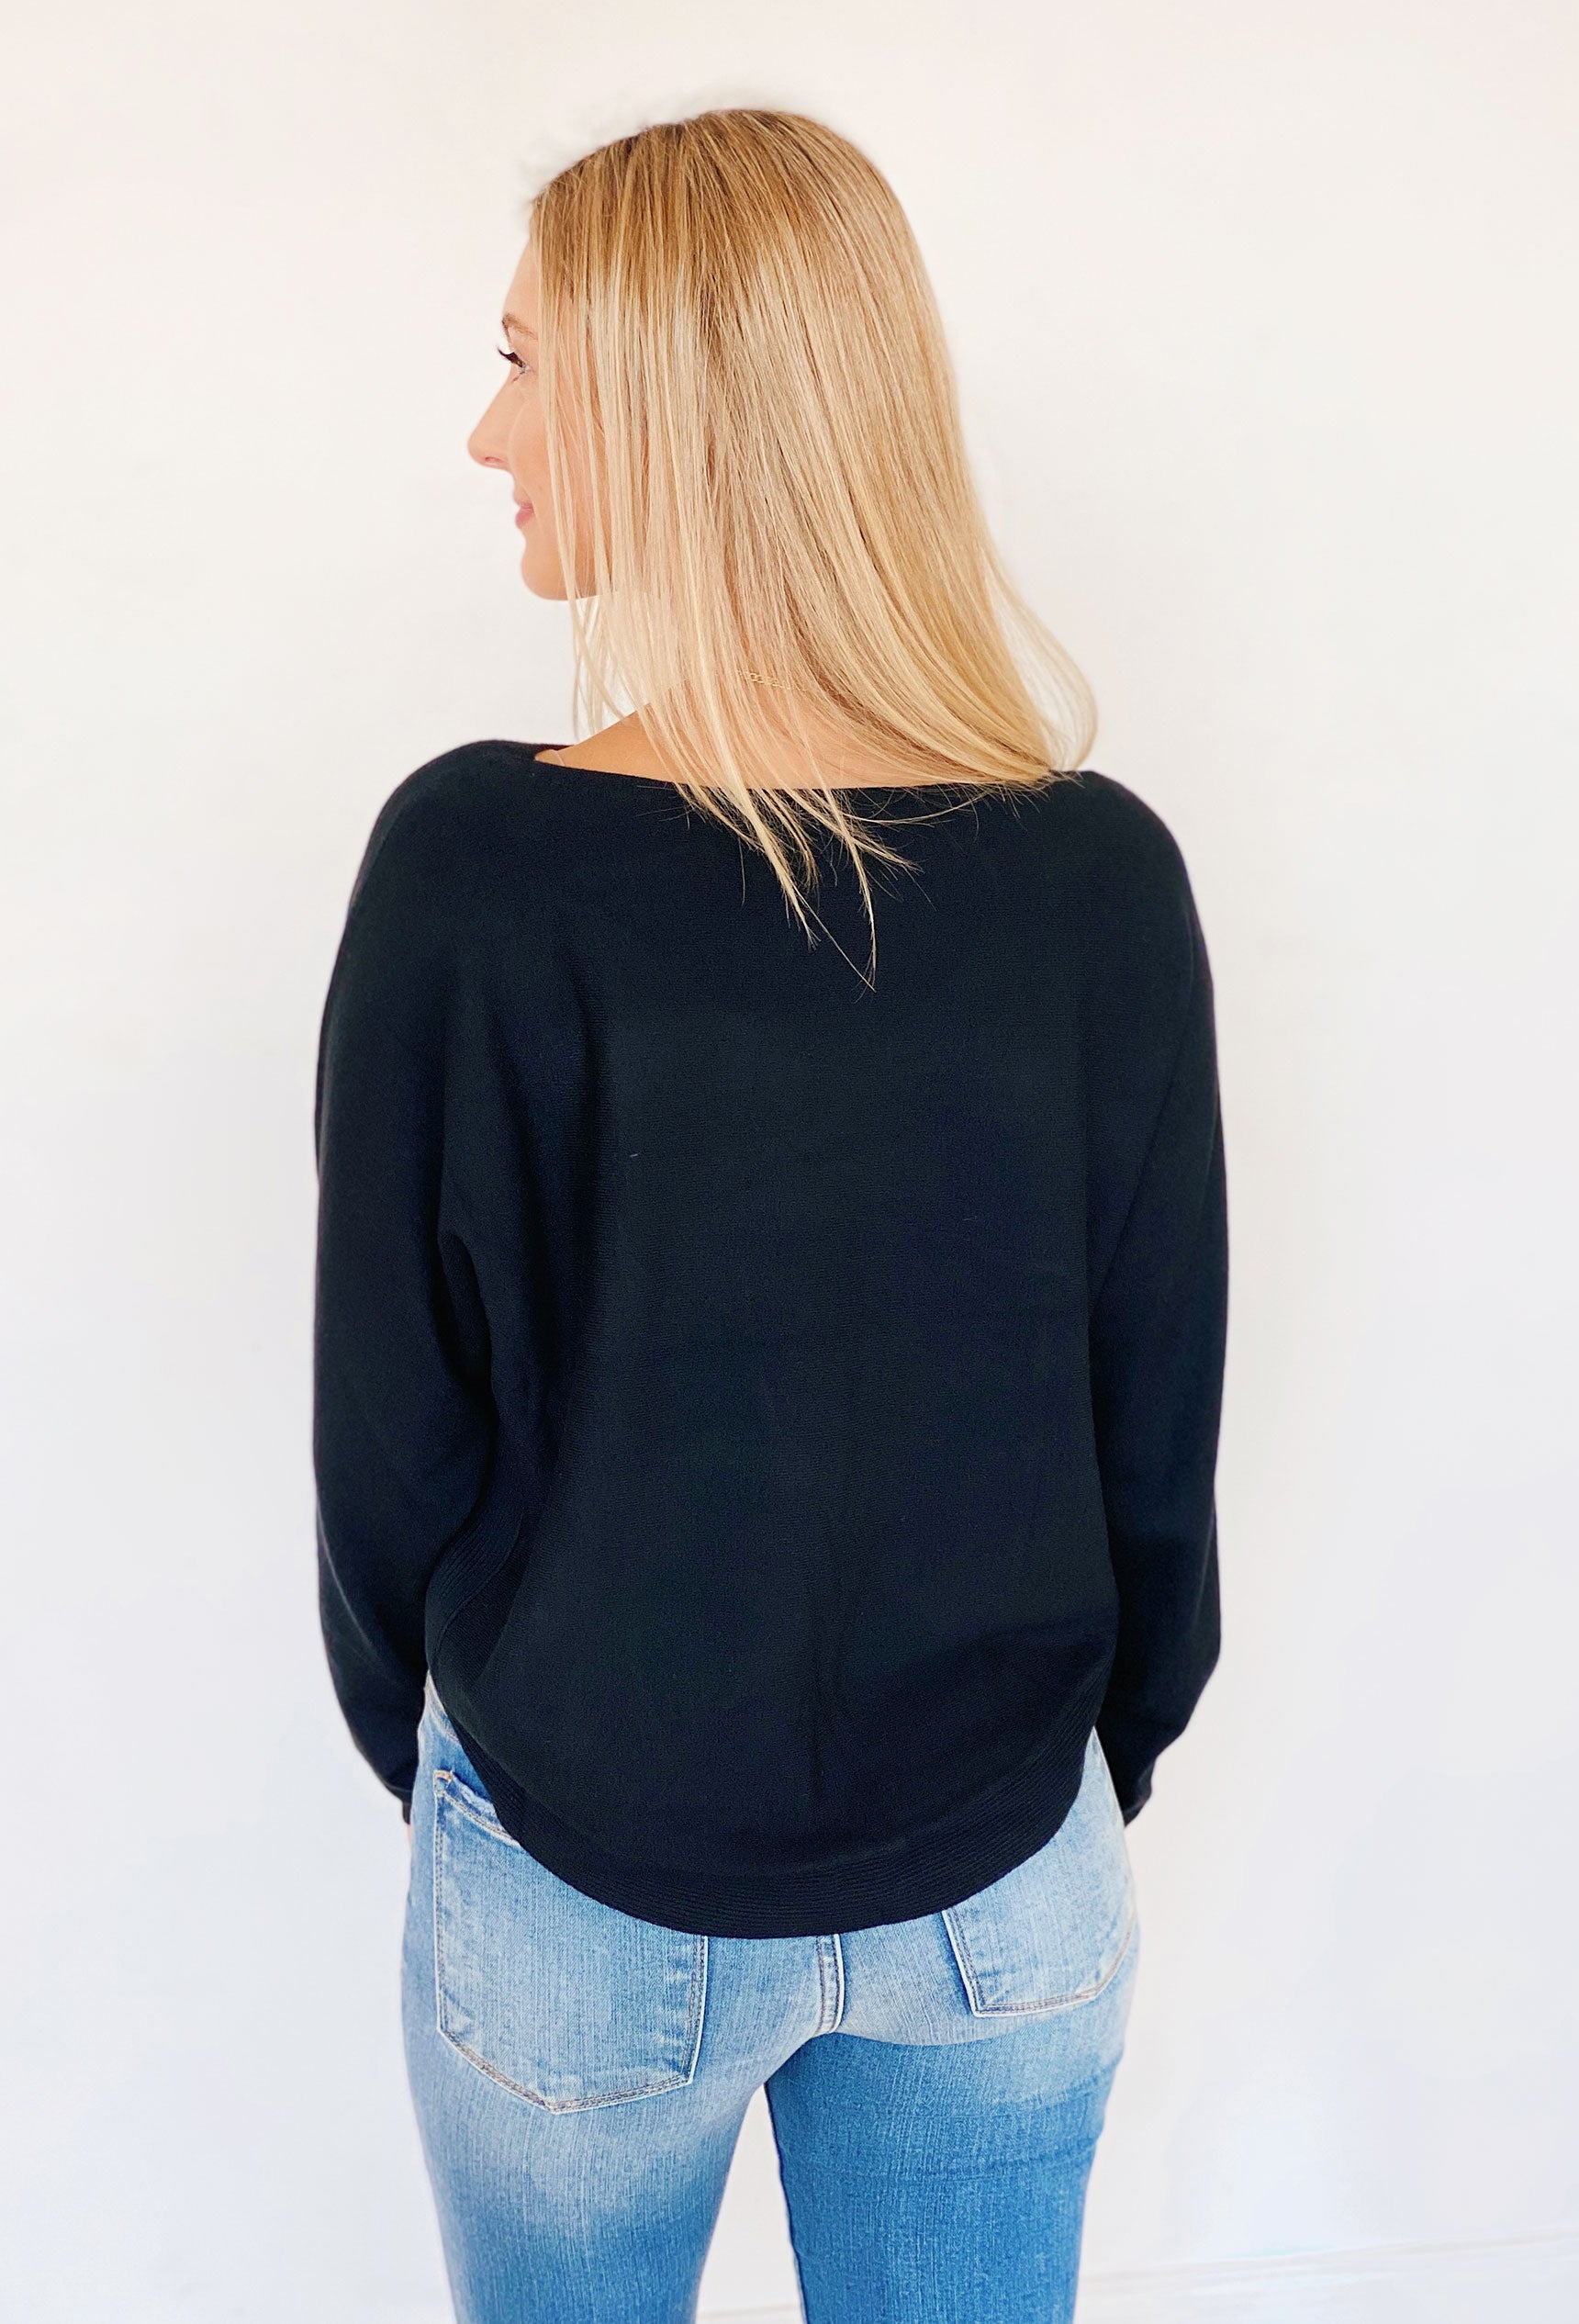 Sara Sweater by Dreamers in Black, cropped style, scalloped hem 